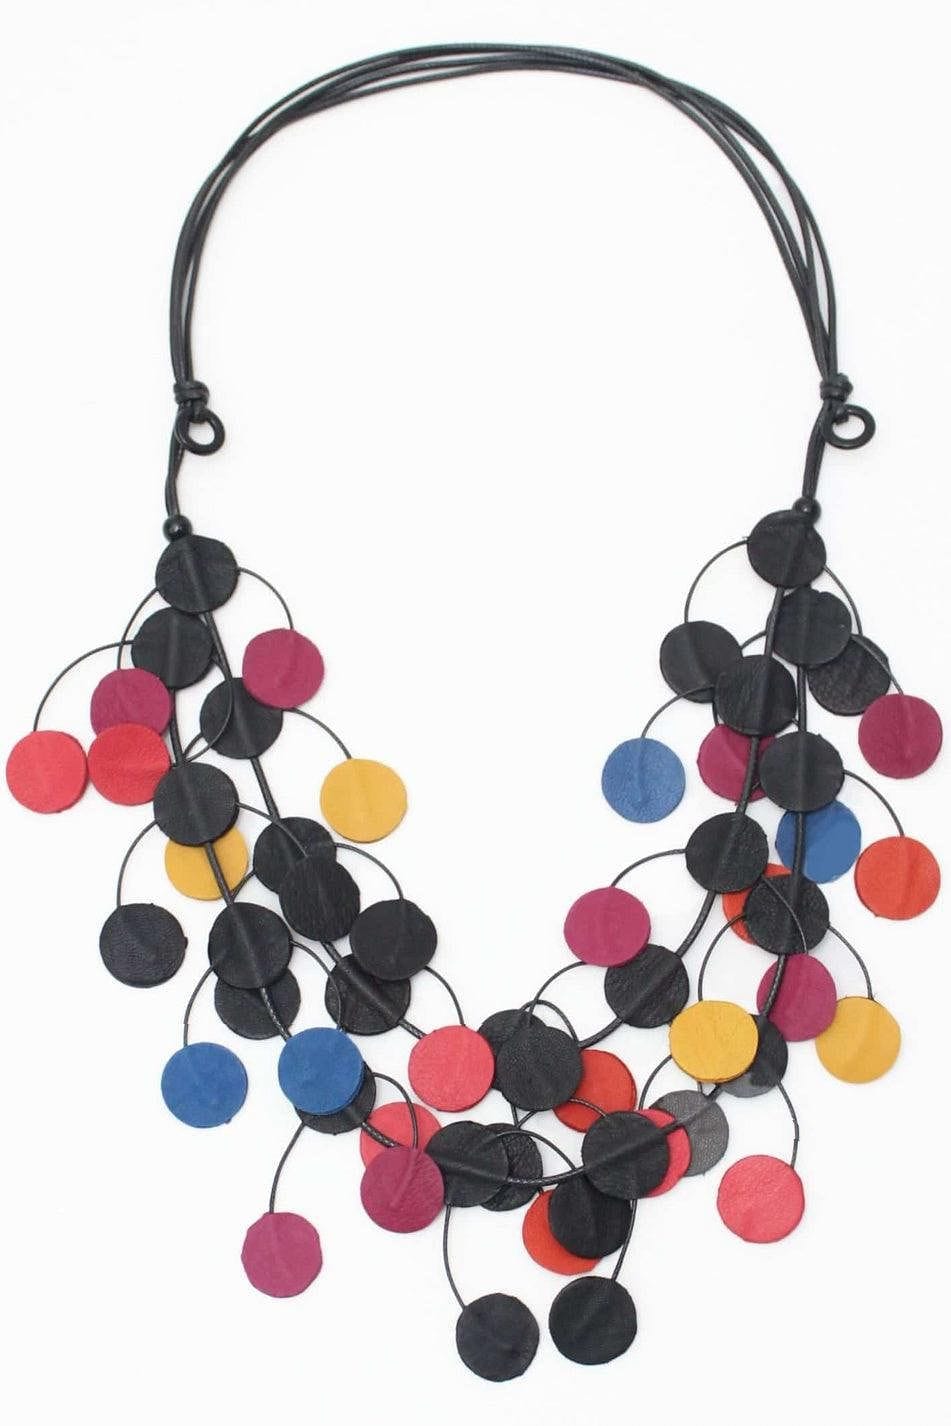 Multi Leather Dots in assorted colors Necklace designed with small flat leather discs intertwining and strung on an adjustable black cord.